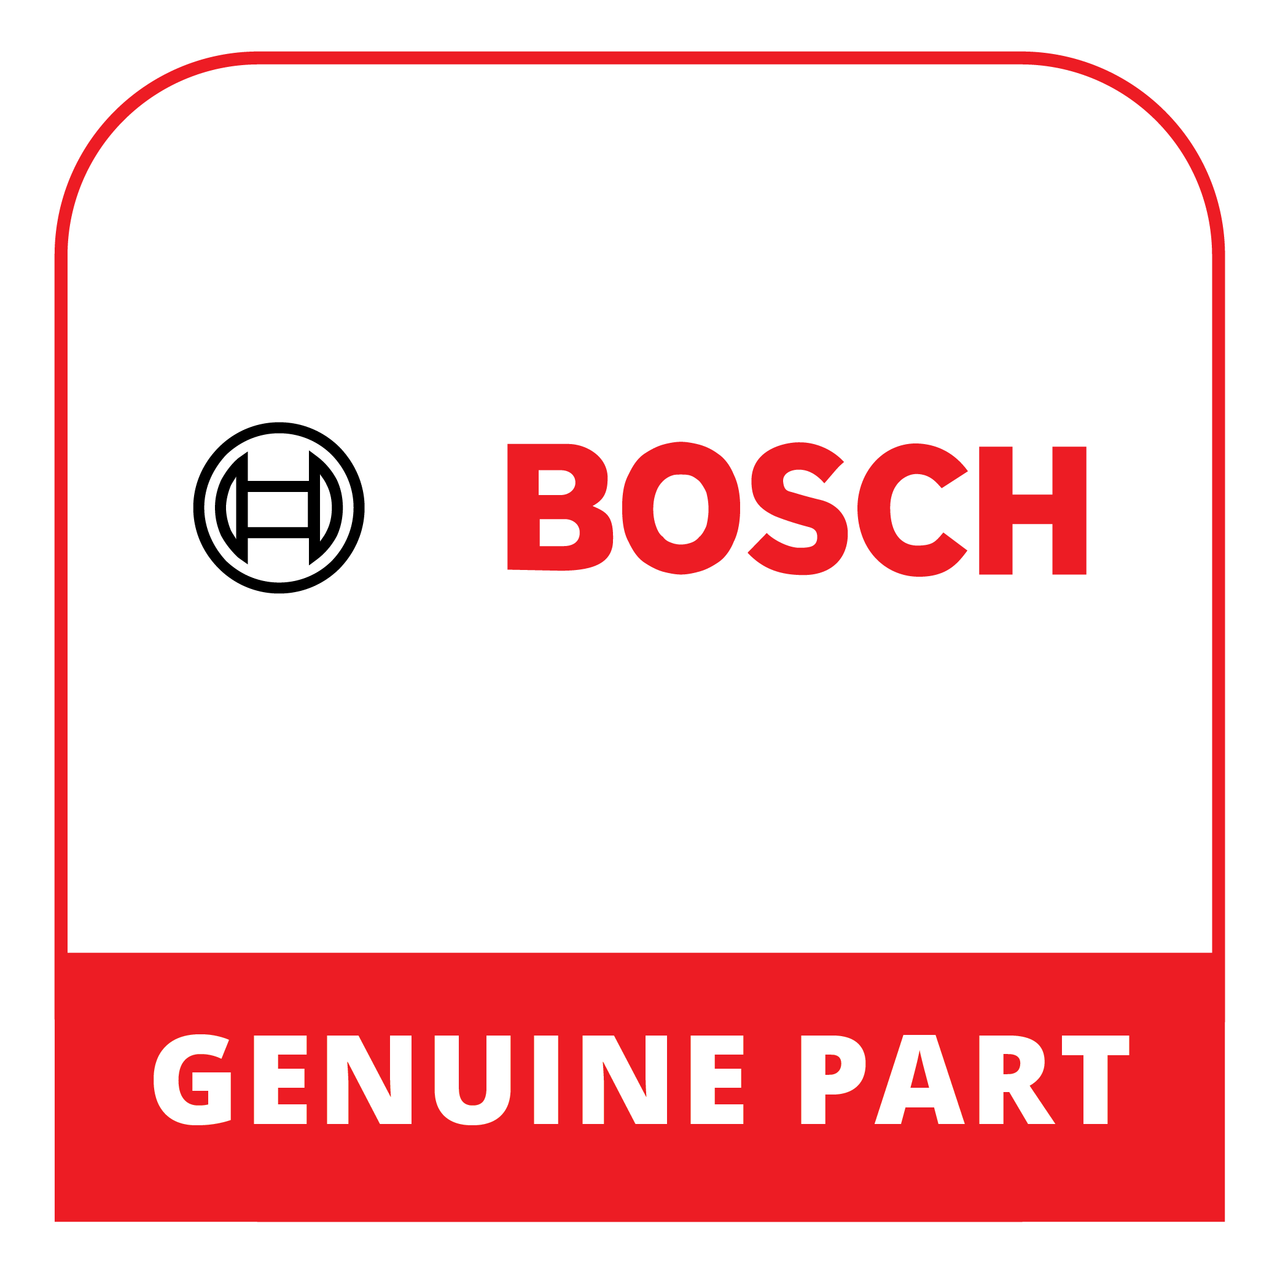 Bosch (Thermador) 20005751 - Strip - Genuine Bosch (Thermador) Part